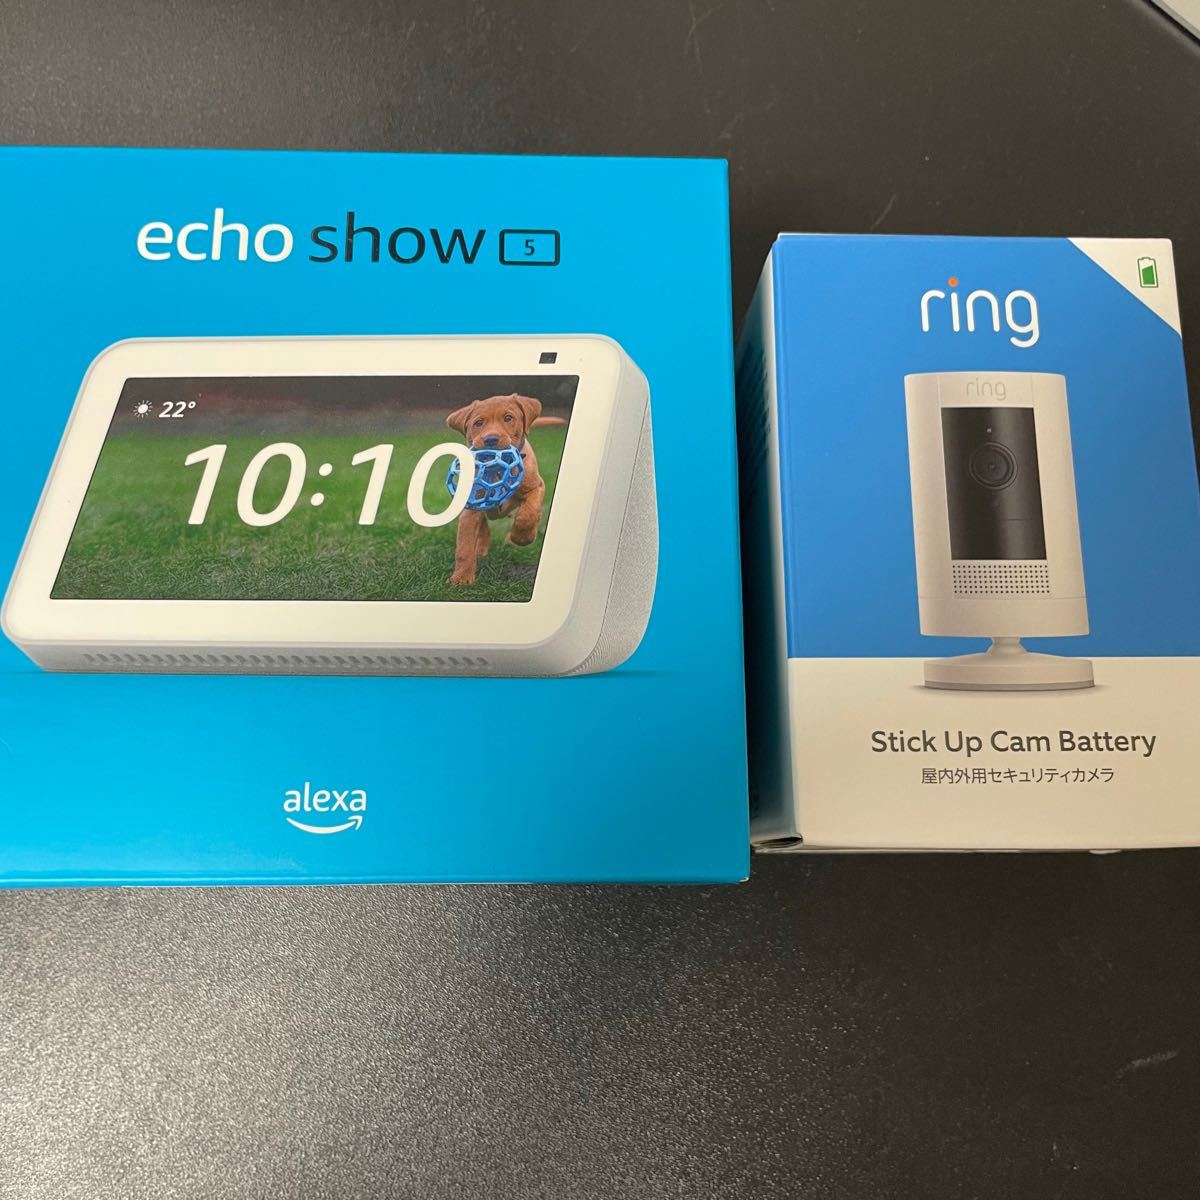 Ring Stick Up Cam Battery & Echo Show 5 第2世代 セット